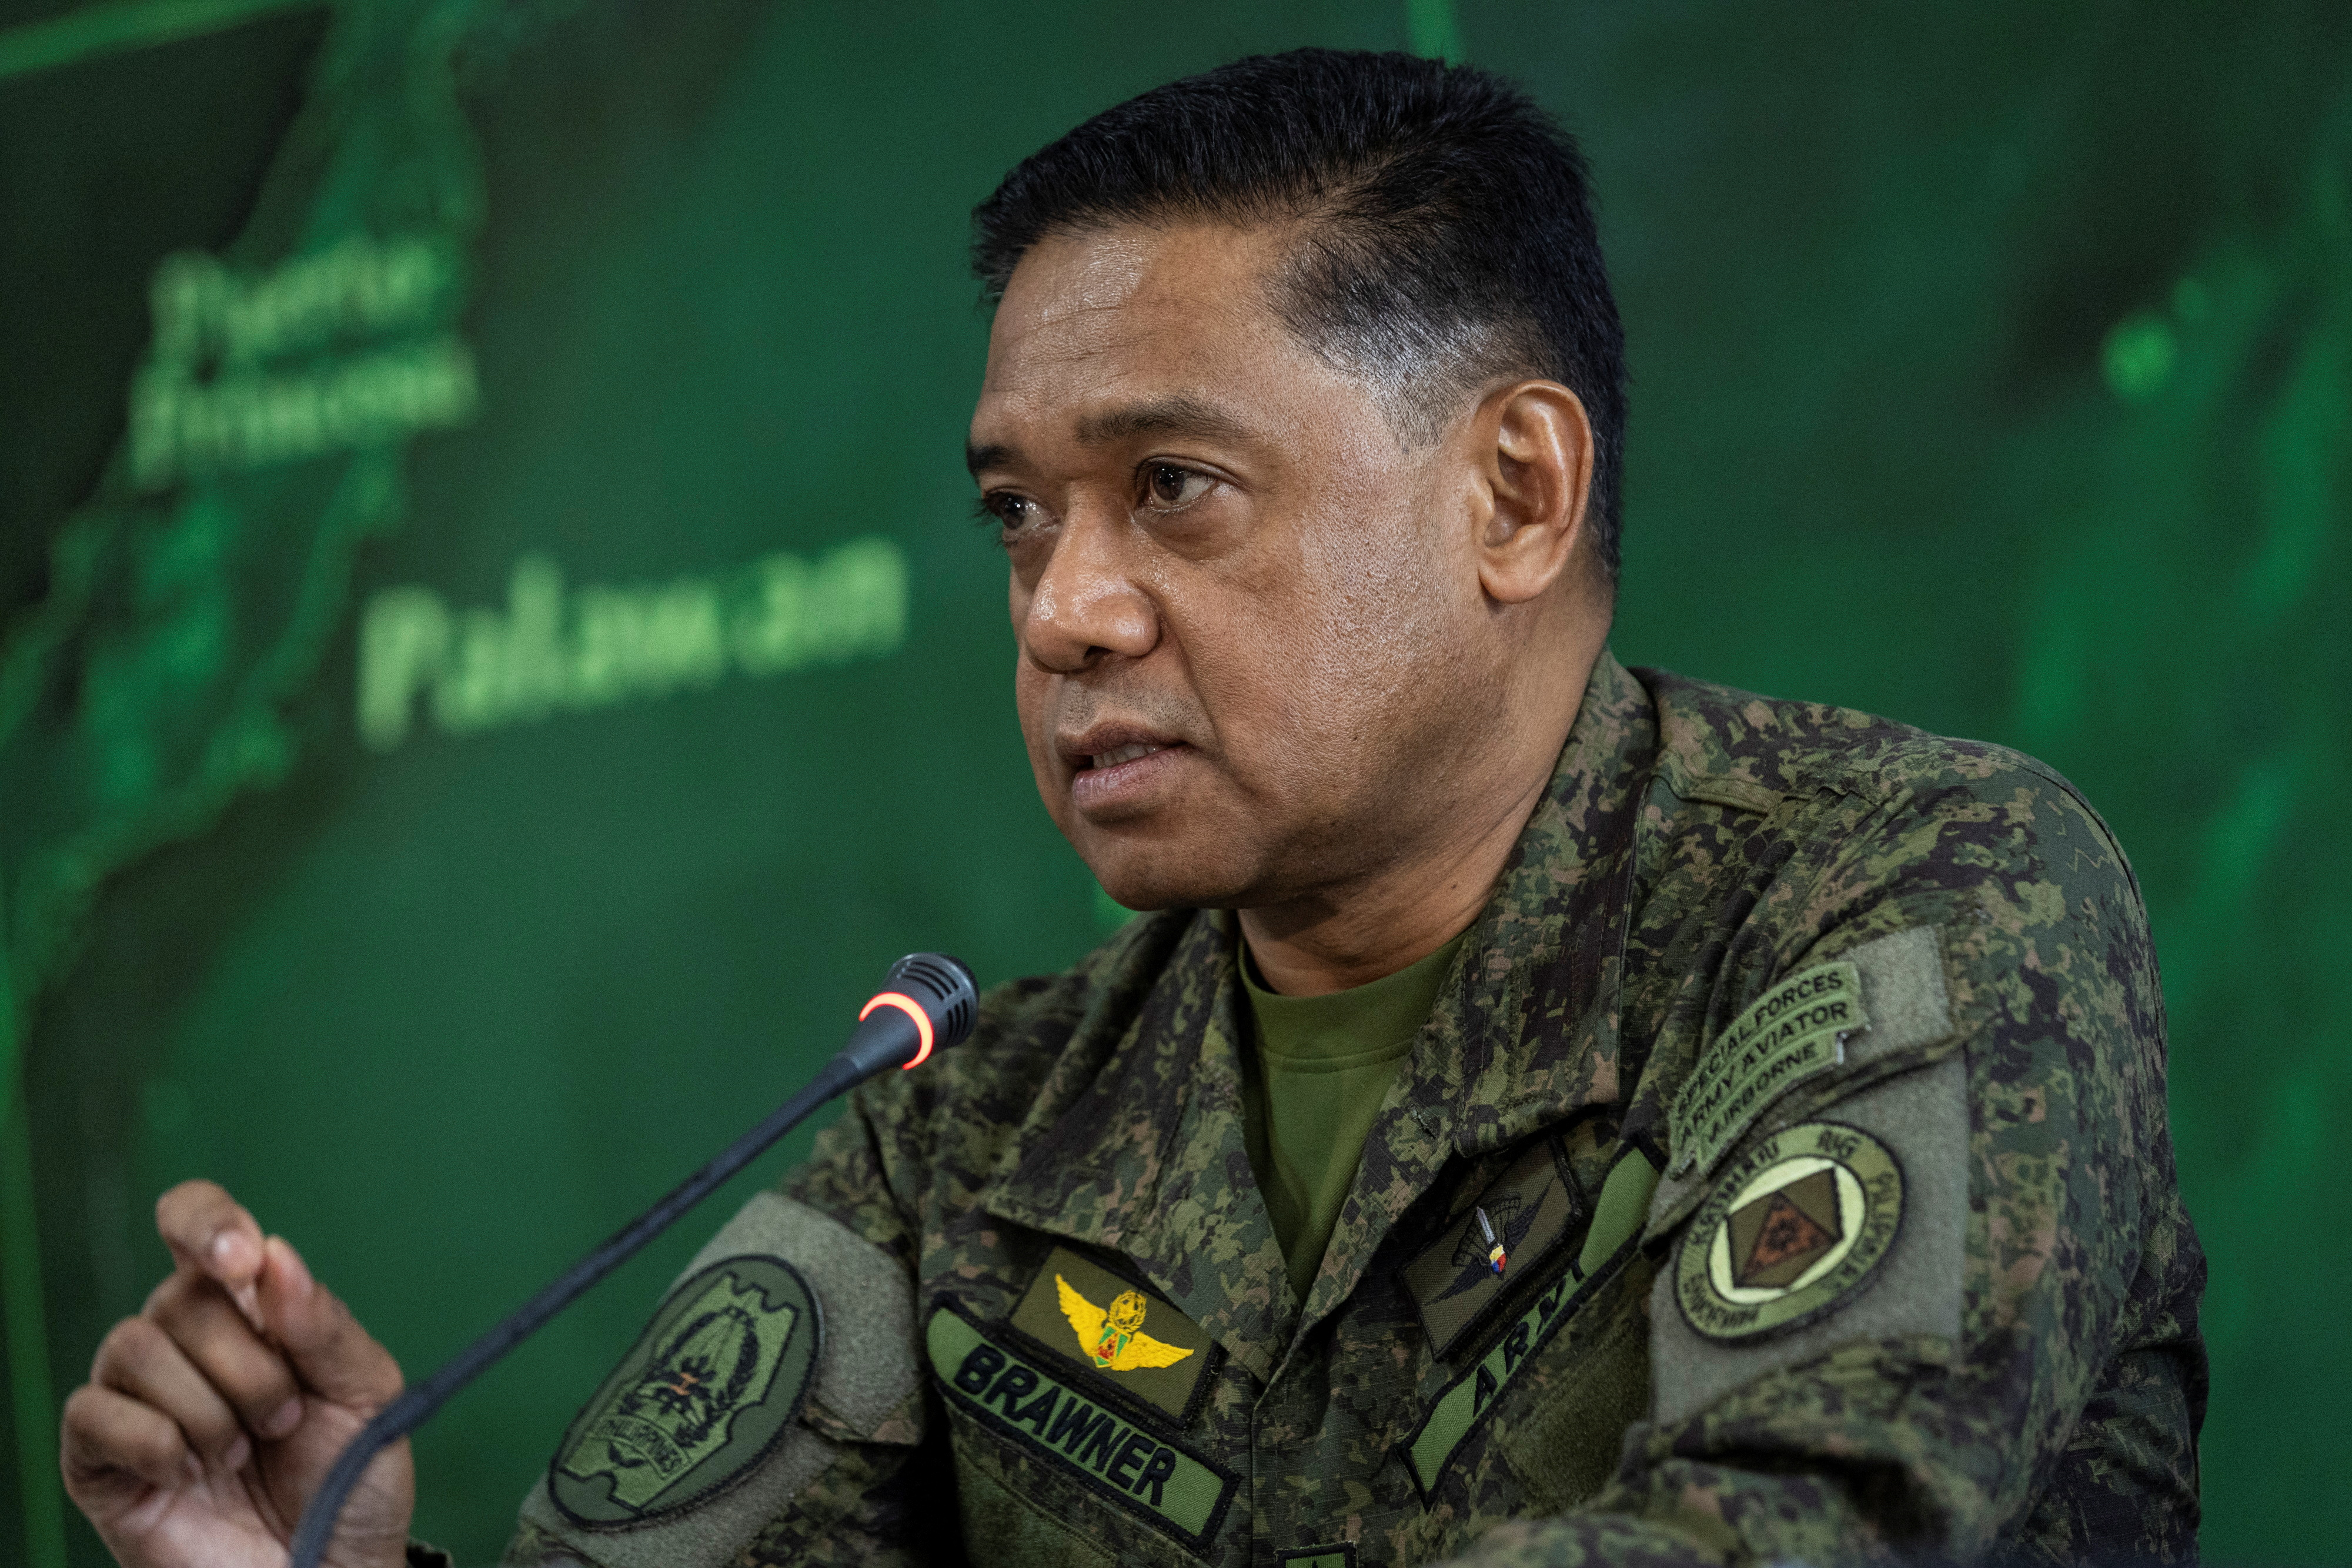 Armed Forces of the Philippines Chief of Staff visits Western Command in charge of parts of South China Sea